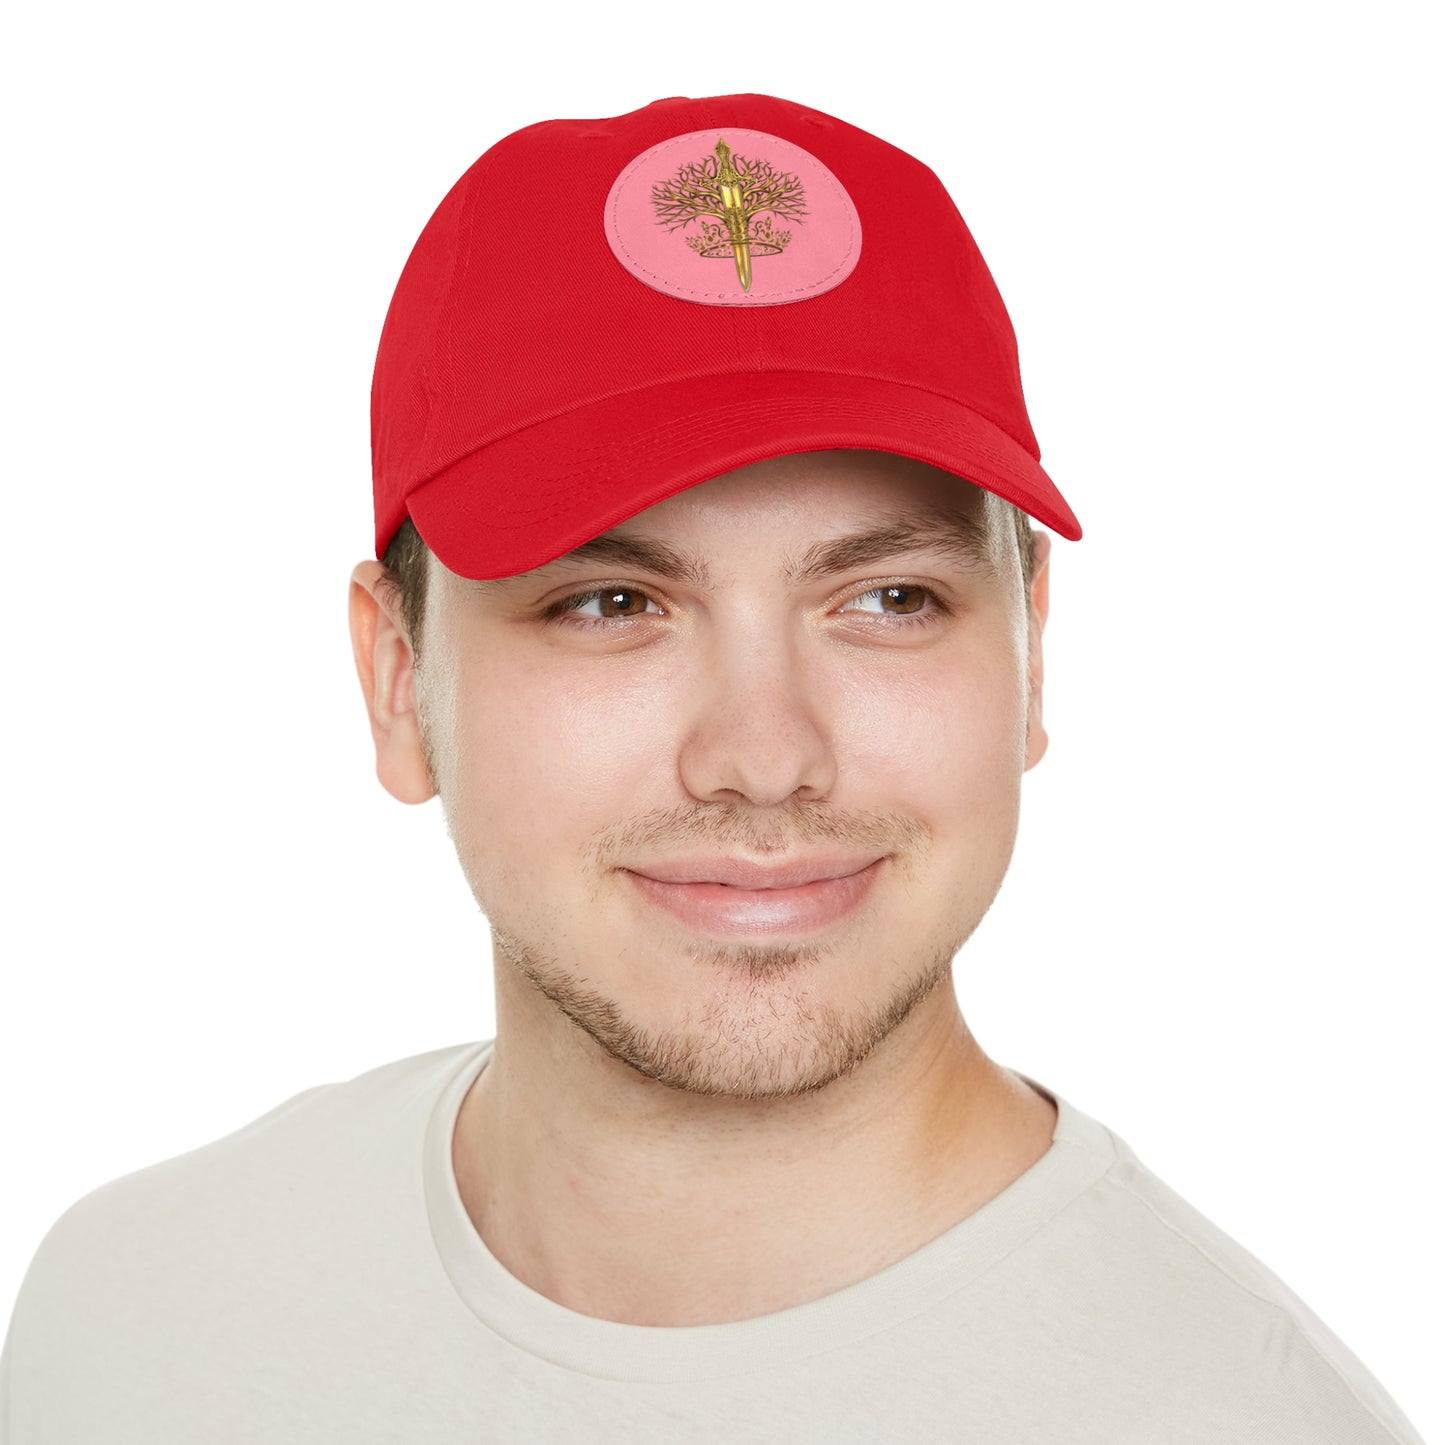 ElBin Logo Hat with Leather Patch (Round)